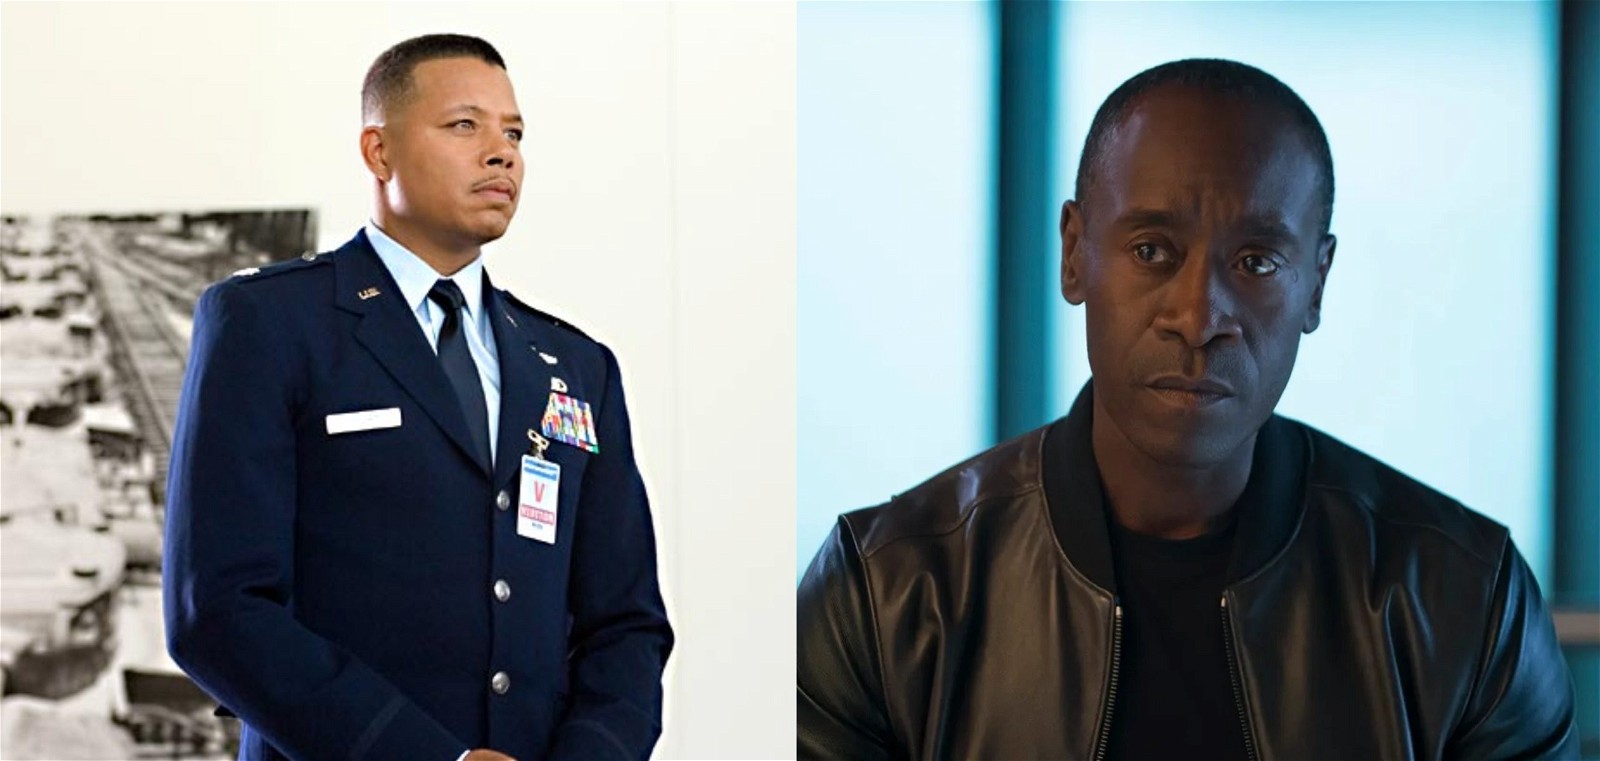 Terrence Howard and Don Cheadle as Rhodey 